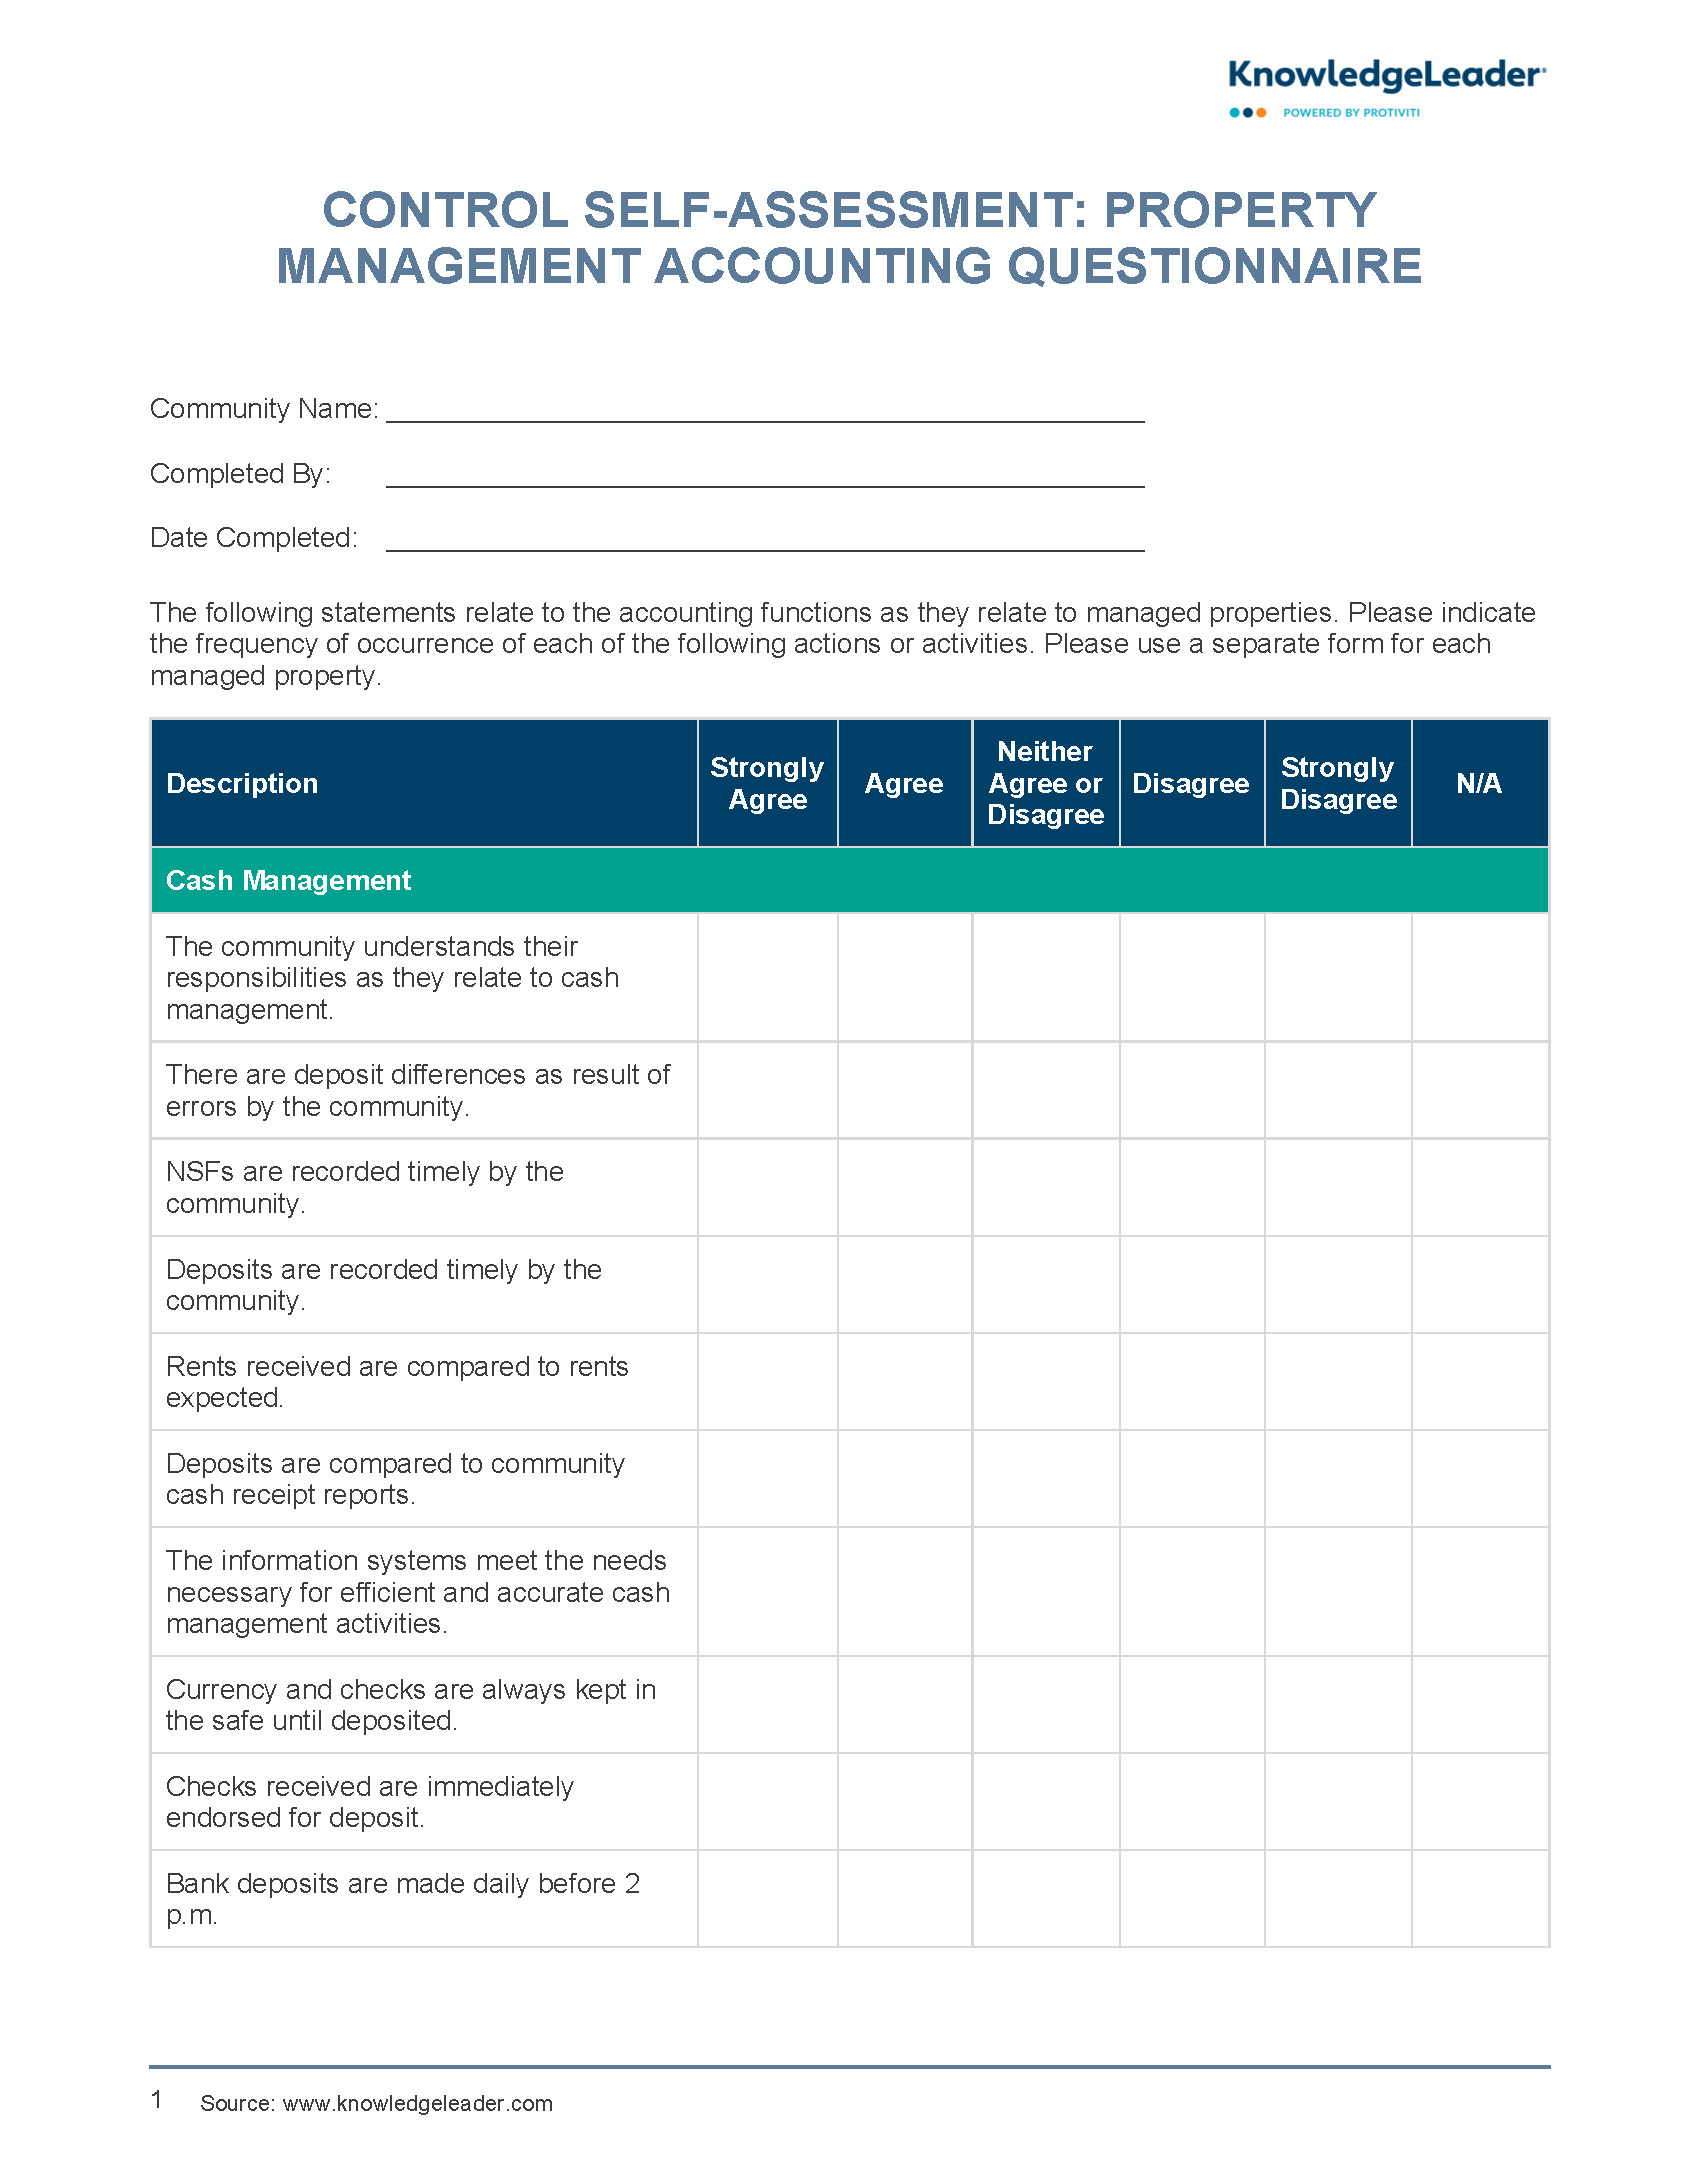 Screenshot of the first page of Control Self-Assessment - Property Management Accounting Questionnaire